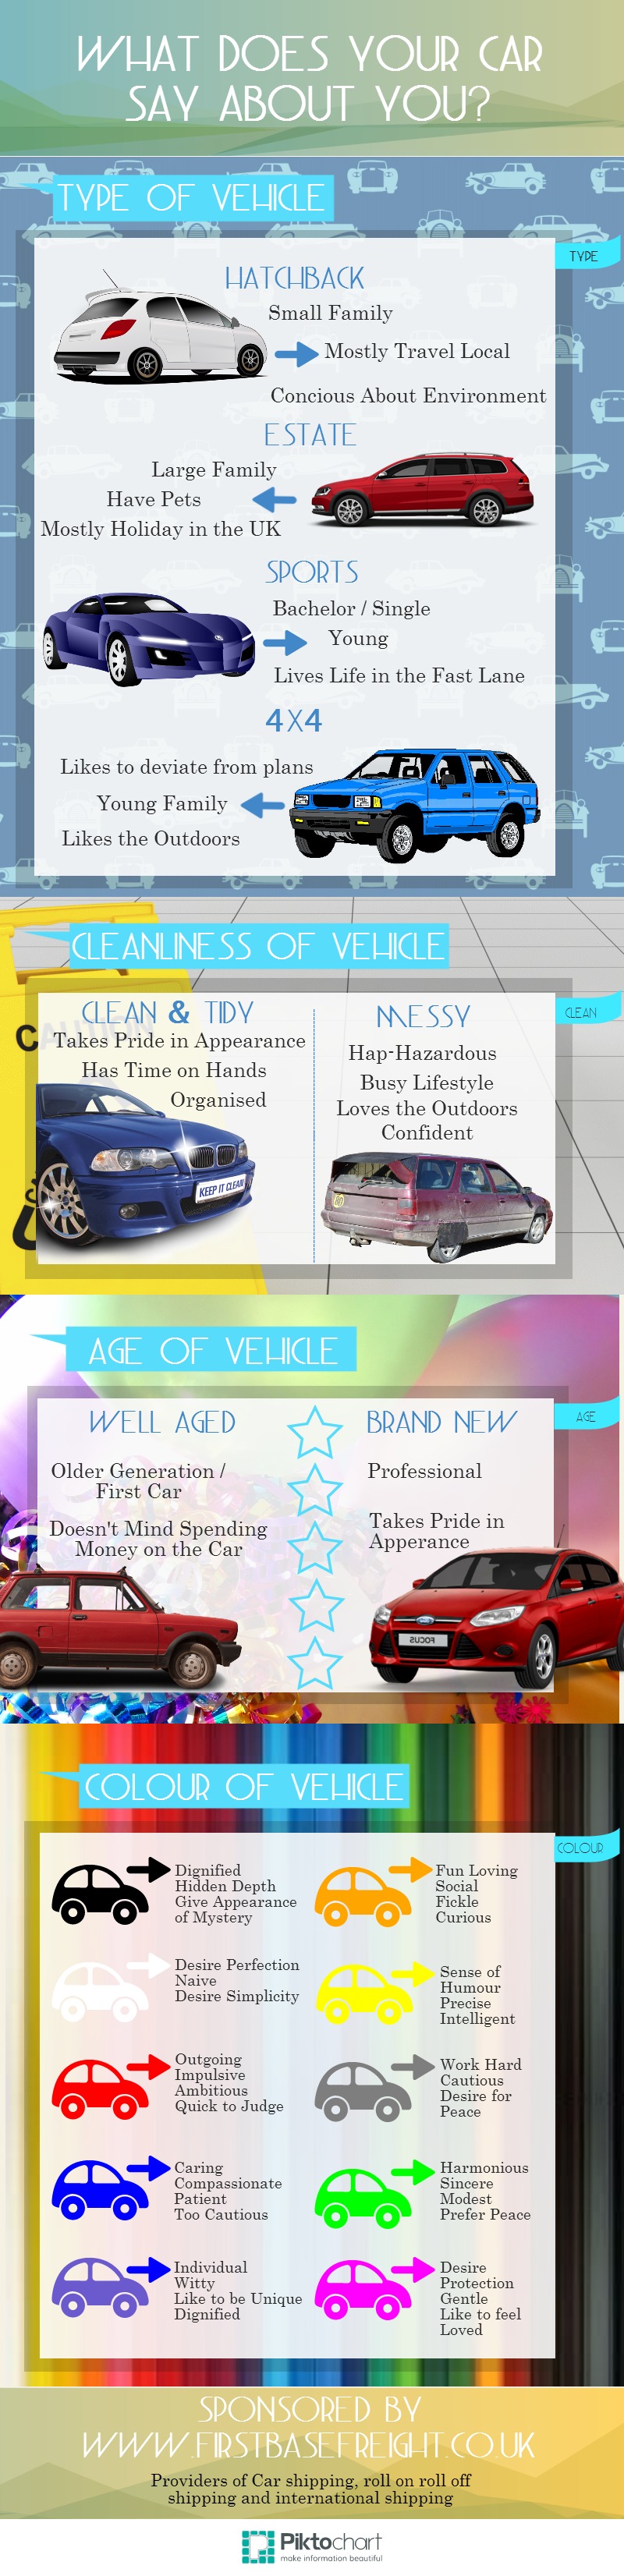 What Does Your Car Say About You? | Visual.ly